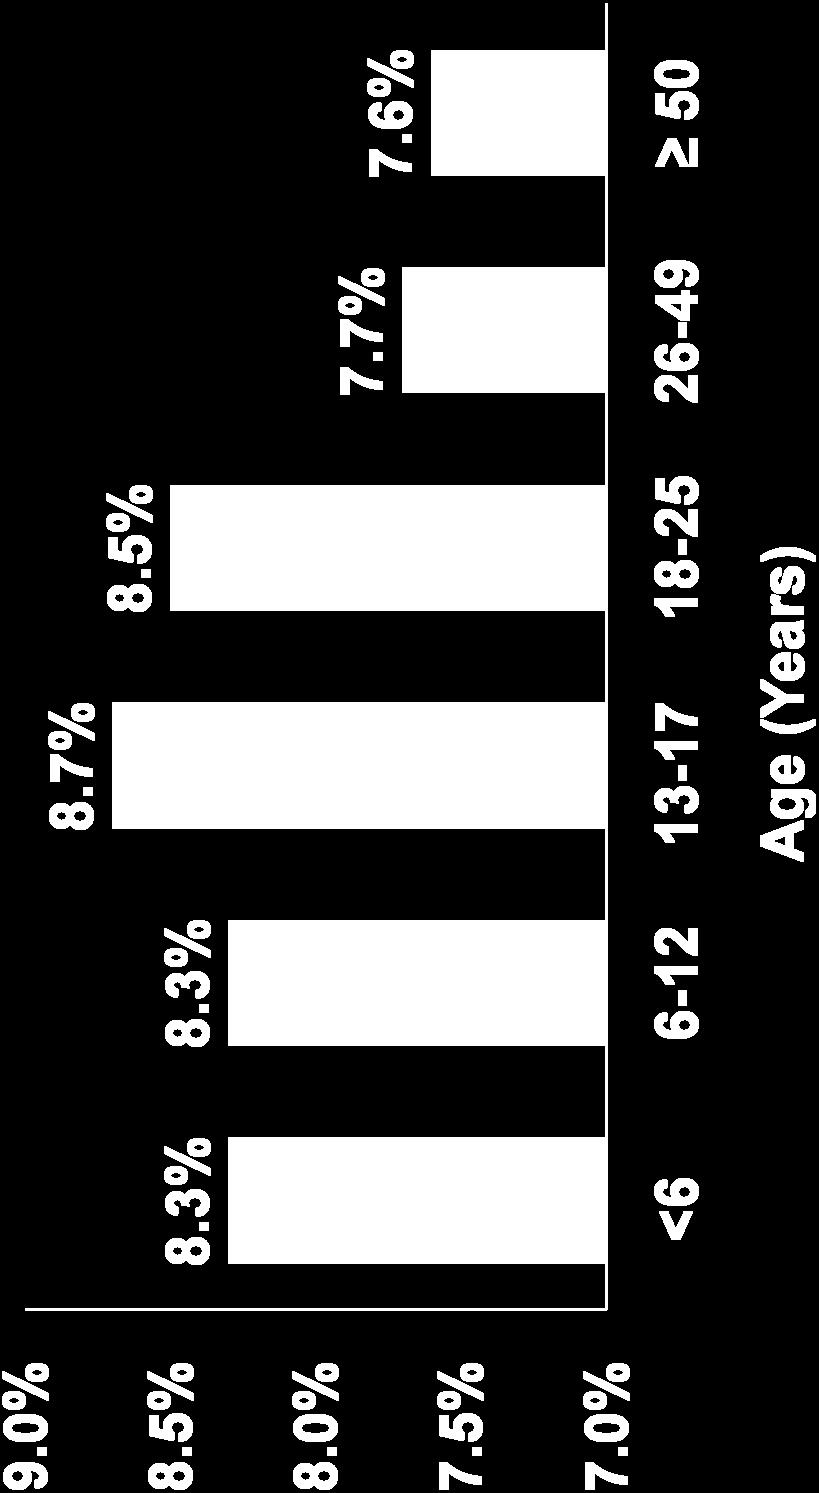 Mean HbA1c by Age Group